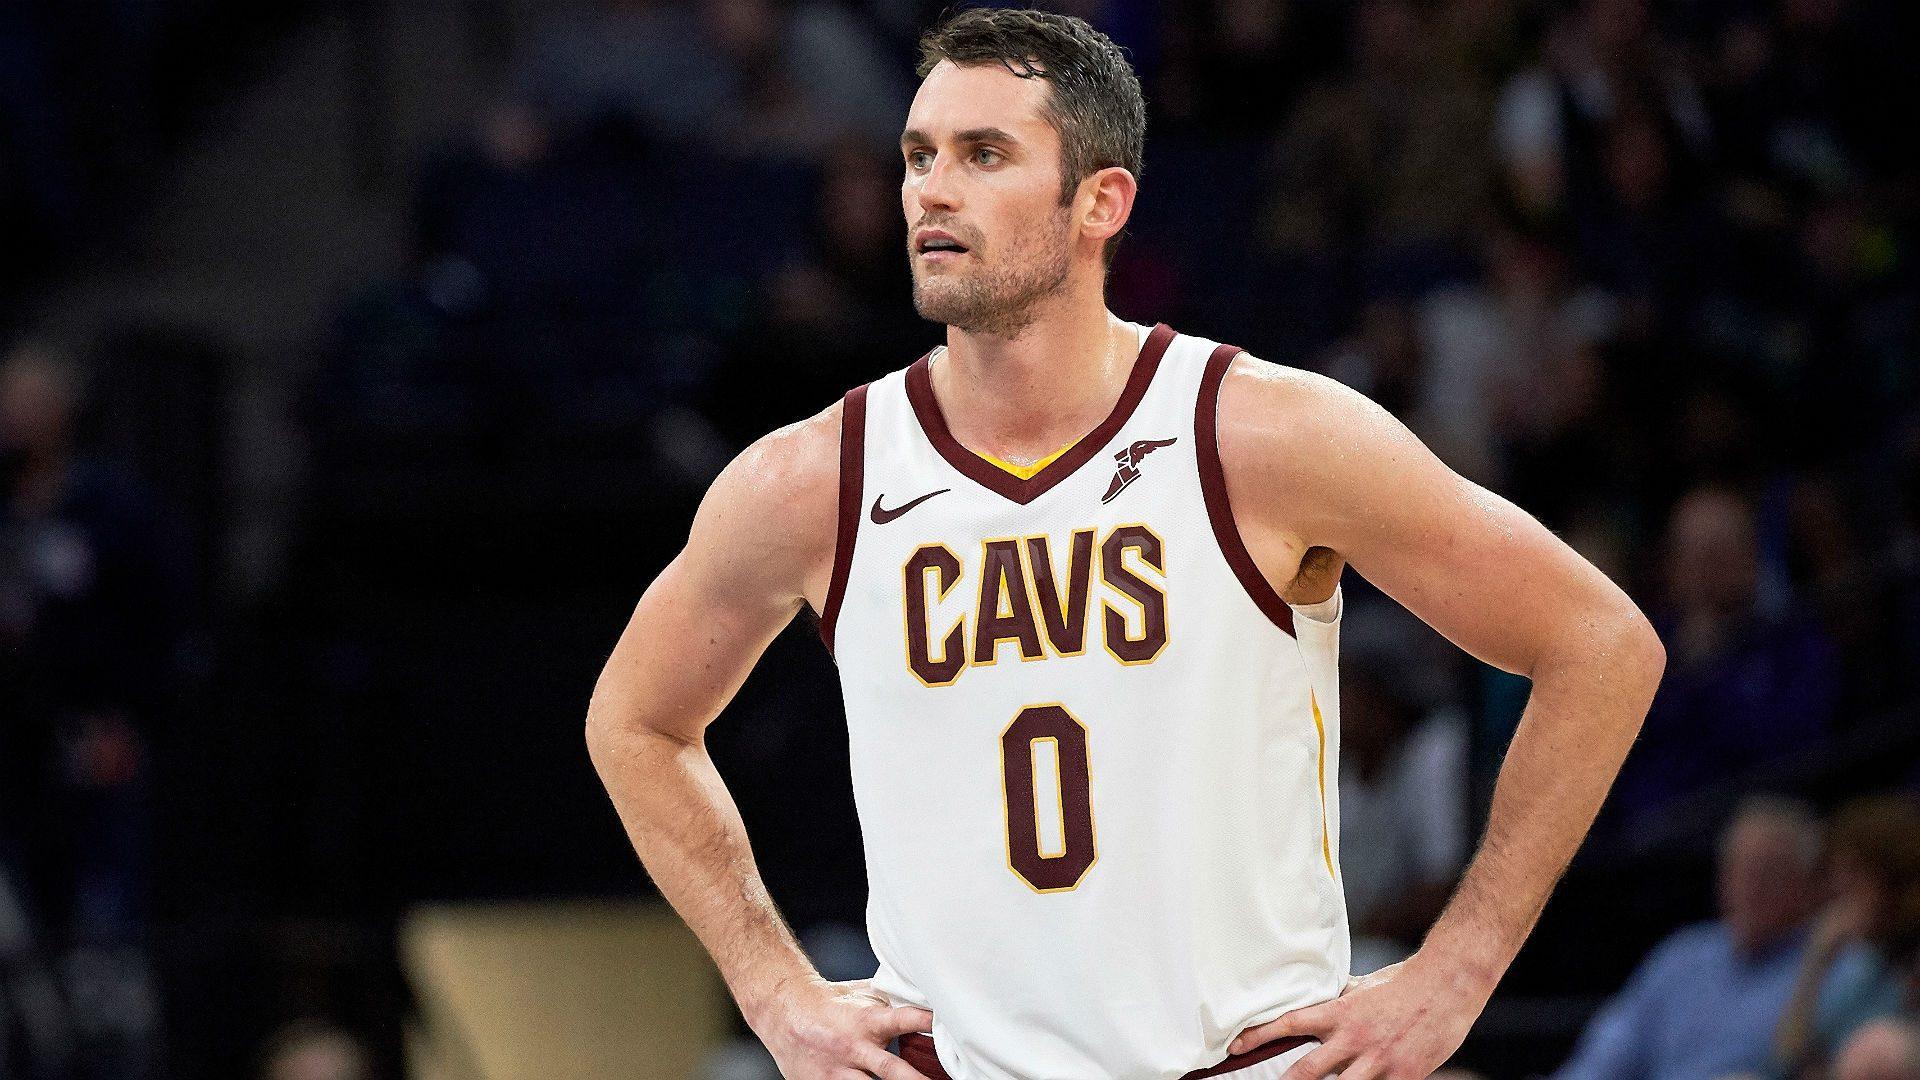 Report: Cavs F Love available for the 'right price'